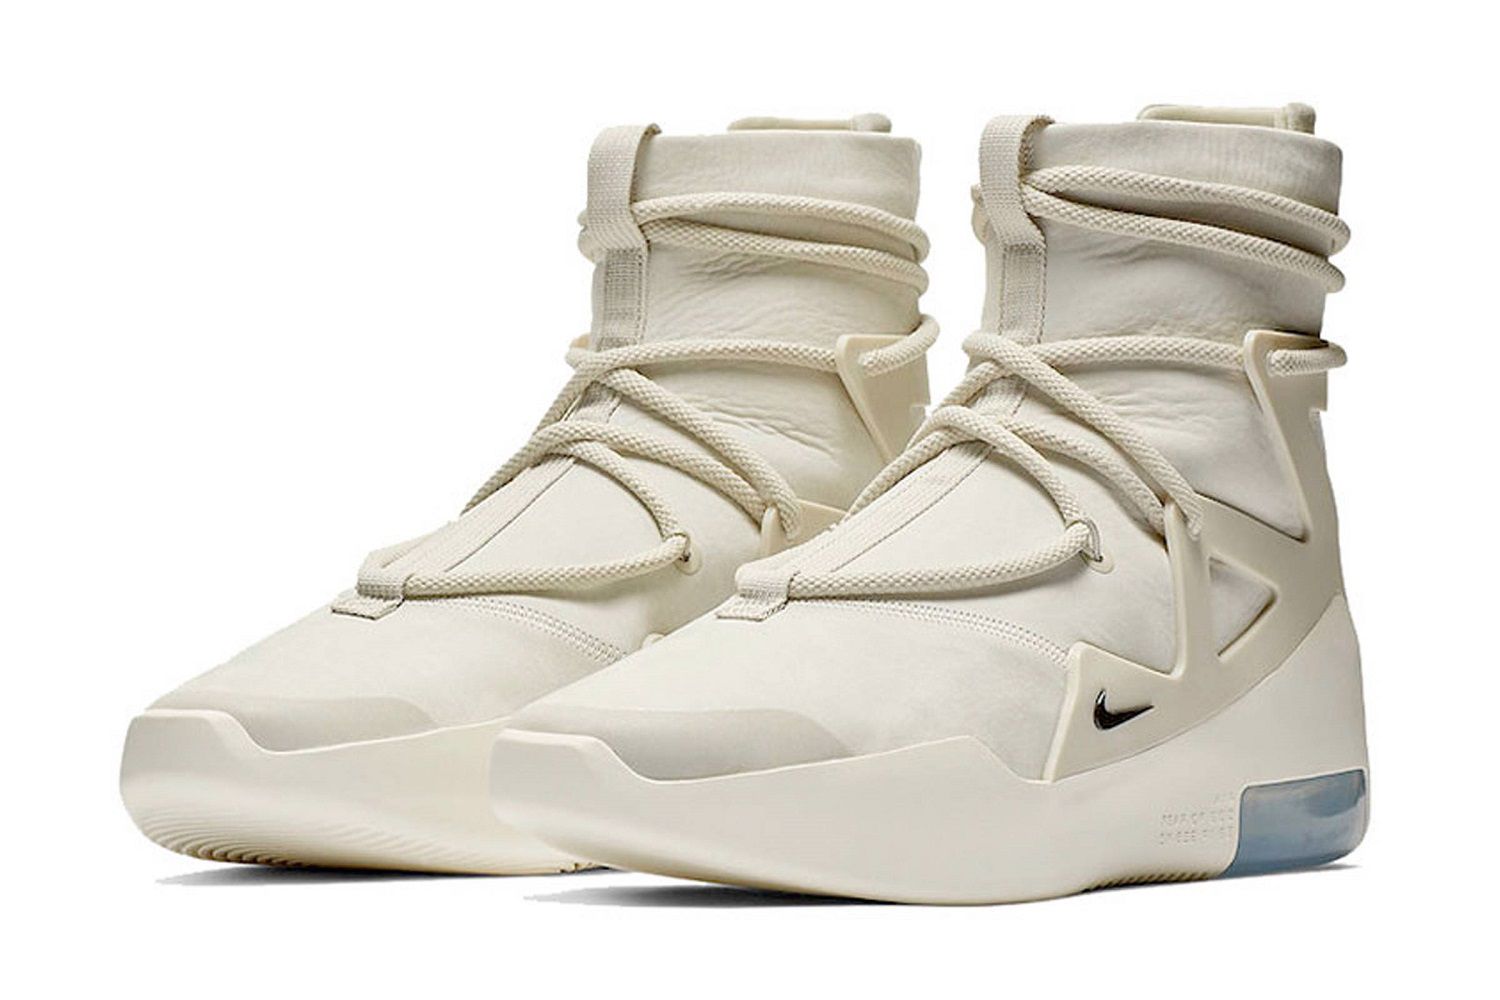 Exclusive: A Look Inside Jerry Lorenzo's Nike Air Fear of God Collaboration